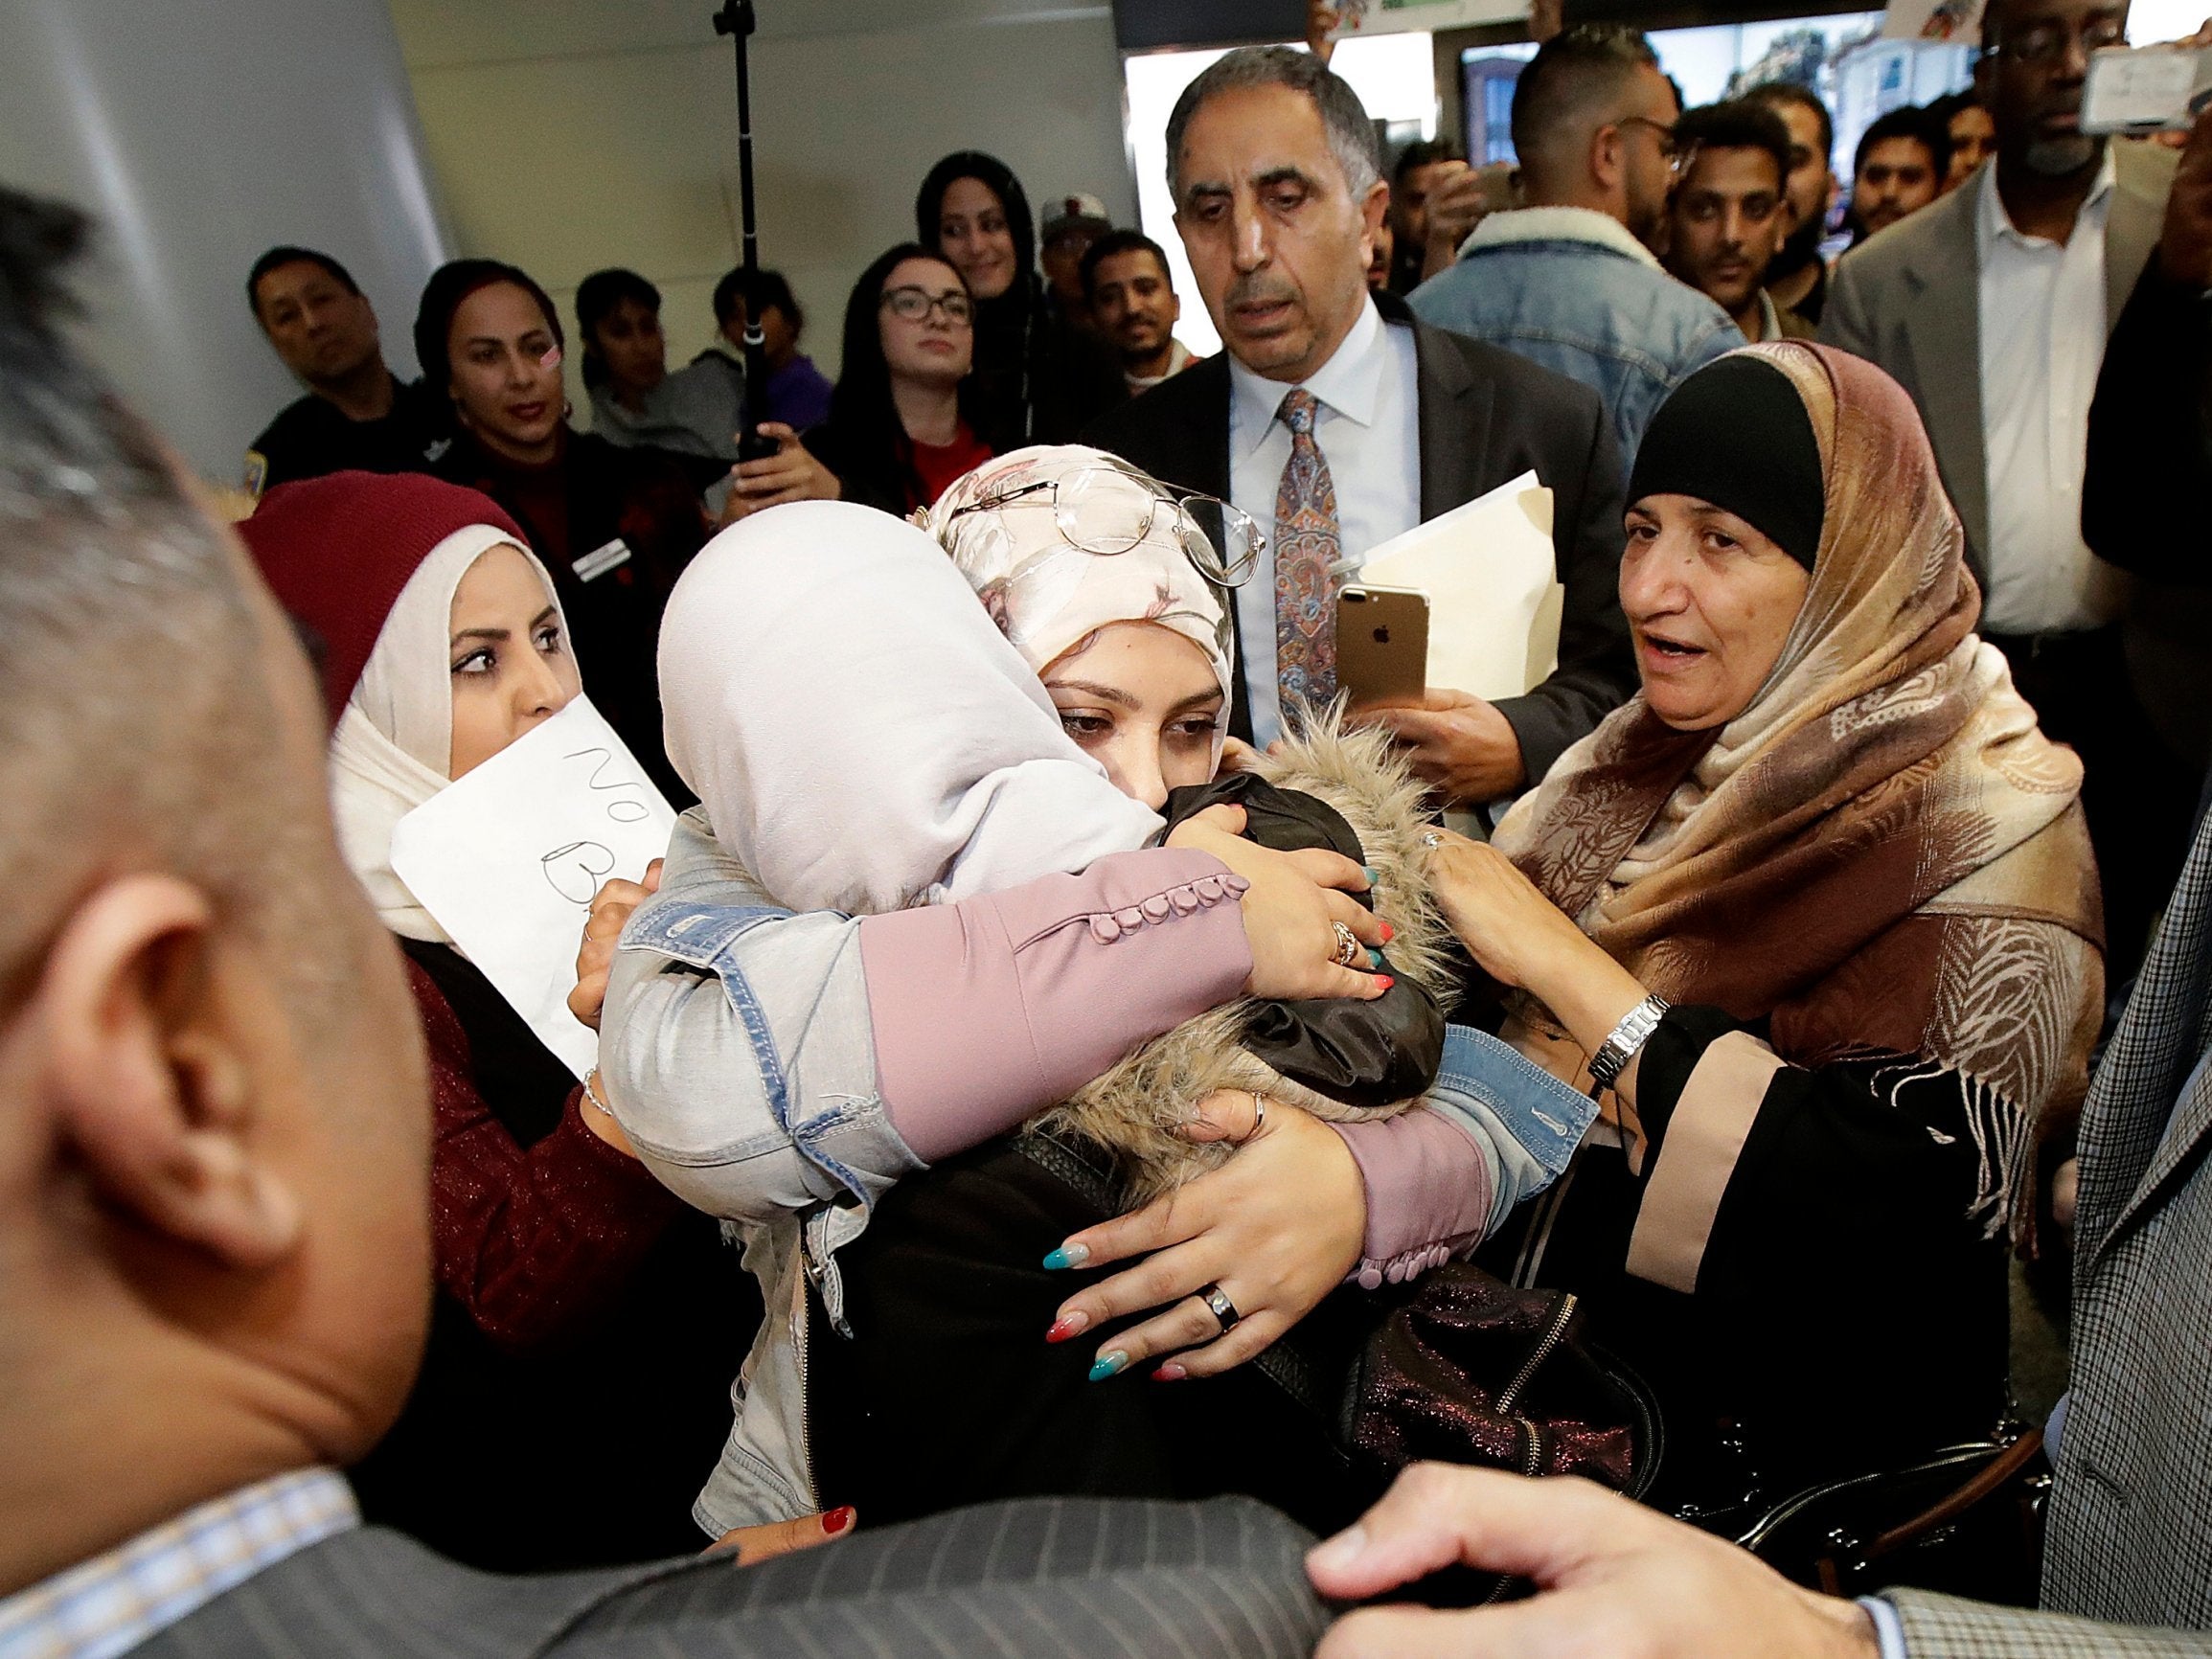 Shaima Swileh (centre with her back turned) is greeted by supporters after arriving at San Francisco International Airport